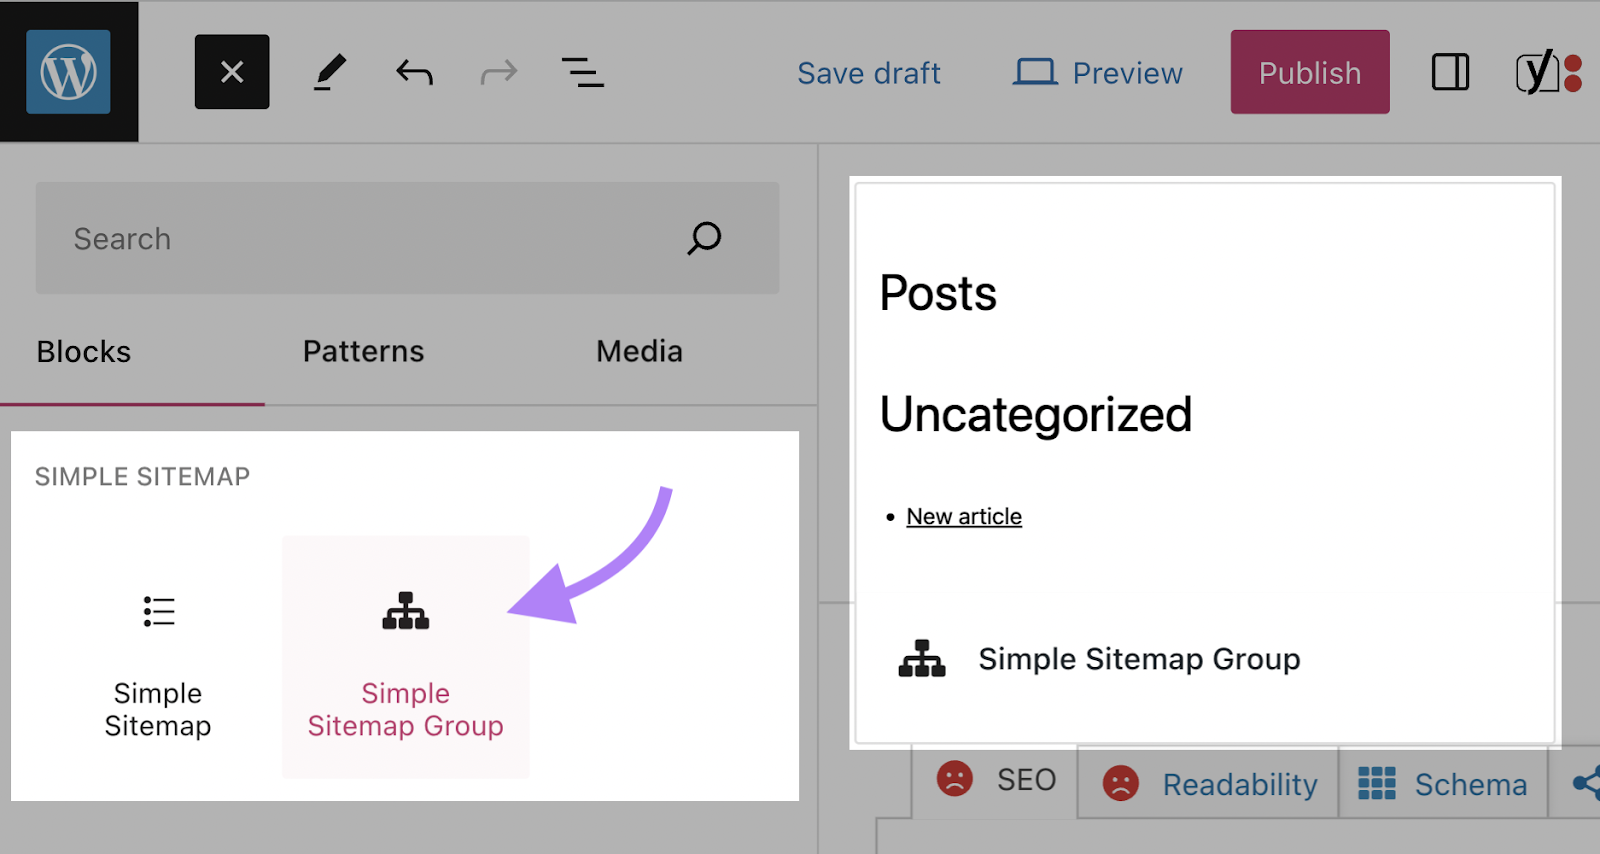 clicking "Simple Sitemap Group" automatically generates a sitemap for your website